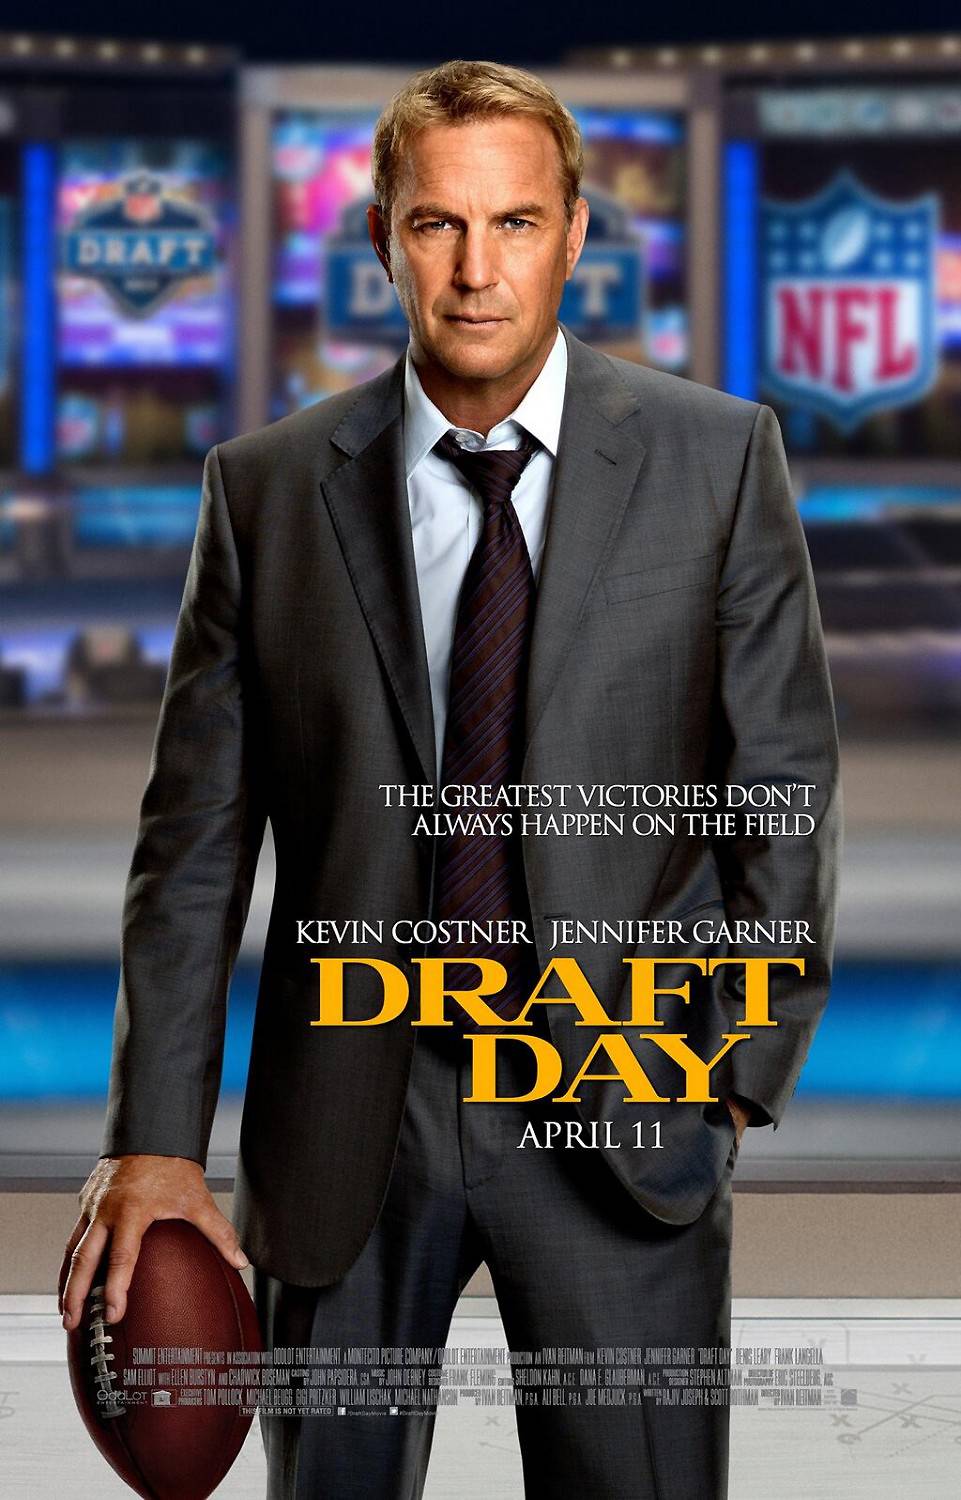 Draft Day, Kevin Costner, Classic Football Movies, Any Given Sunday, Jamie Foxx, LL Cool J, Remember The Titans, Denzel Washington, Water Boy, Adam Sandler, Varisty Blues, Replacements, Jerry Macguire, Tom Cruise, Wildcats, Goldie Hawn, Little Giants, The Program